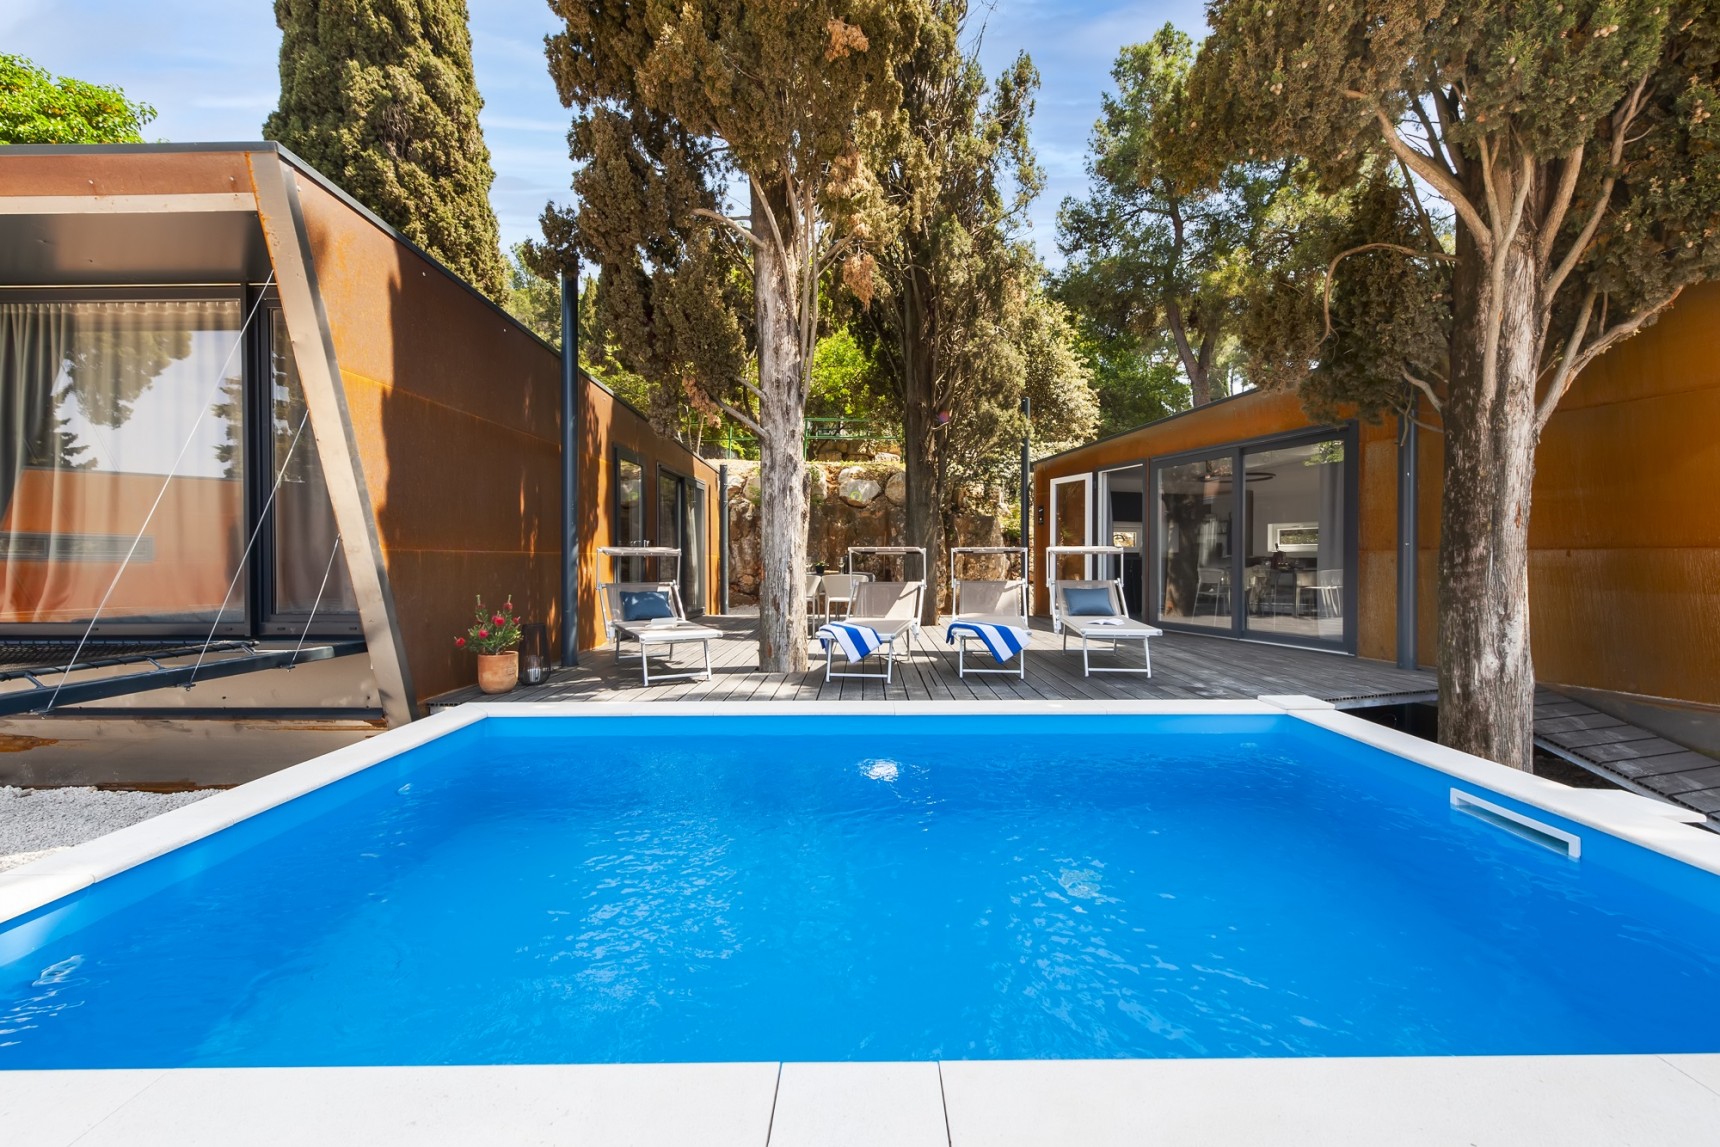 Family Holiday Home mit pool - 2 Module